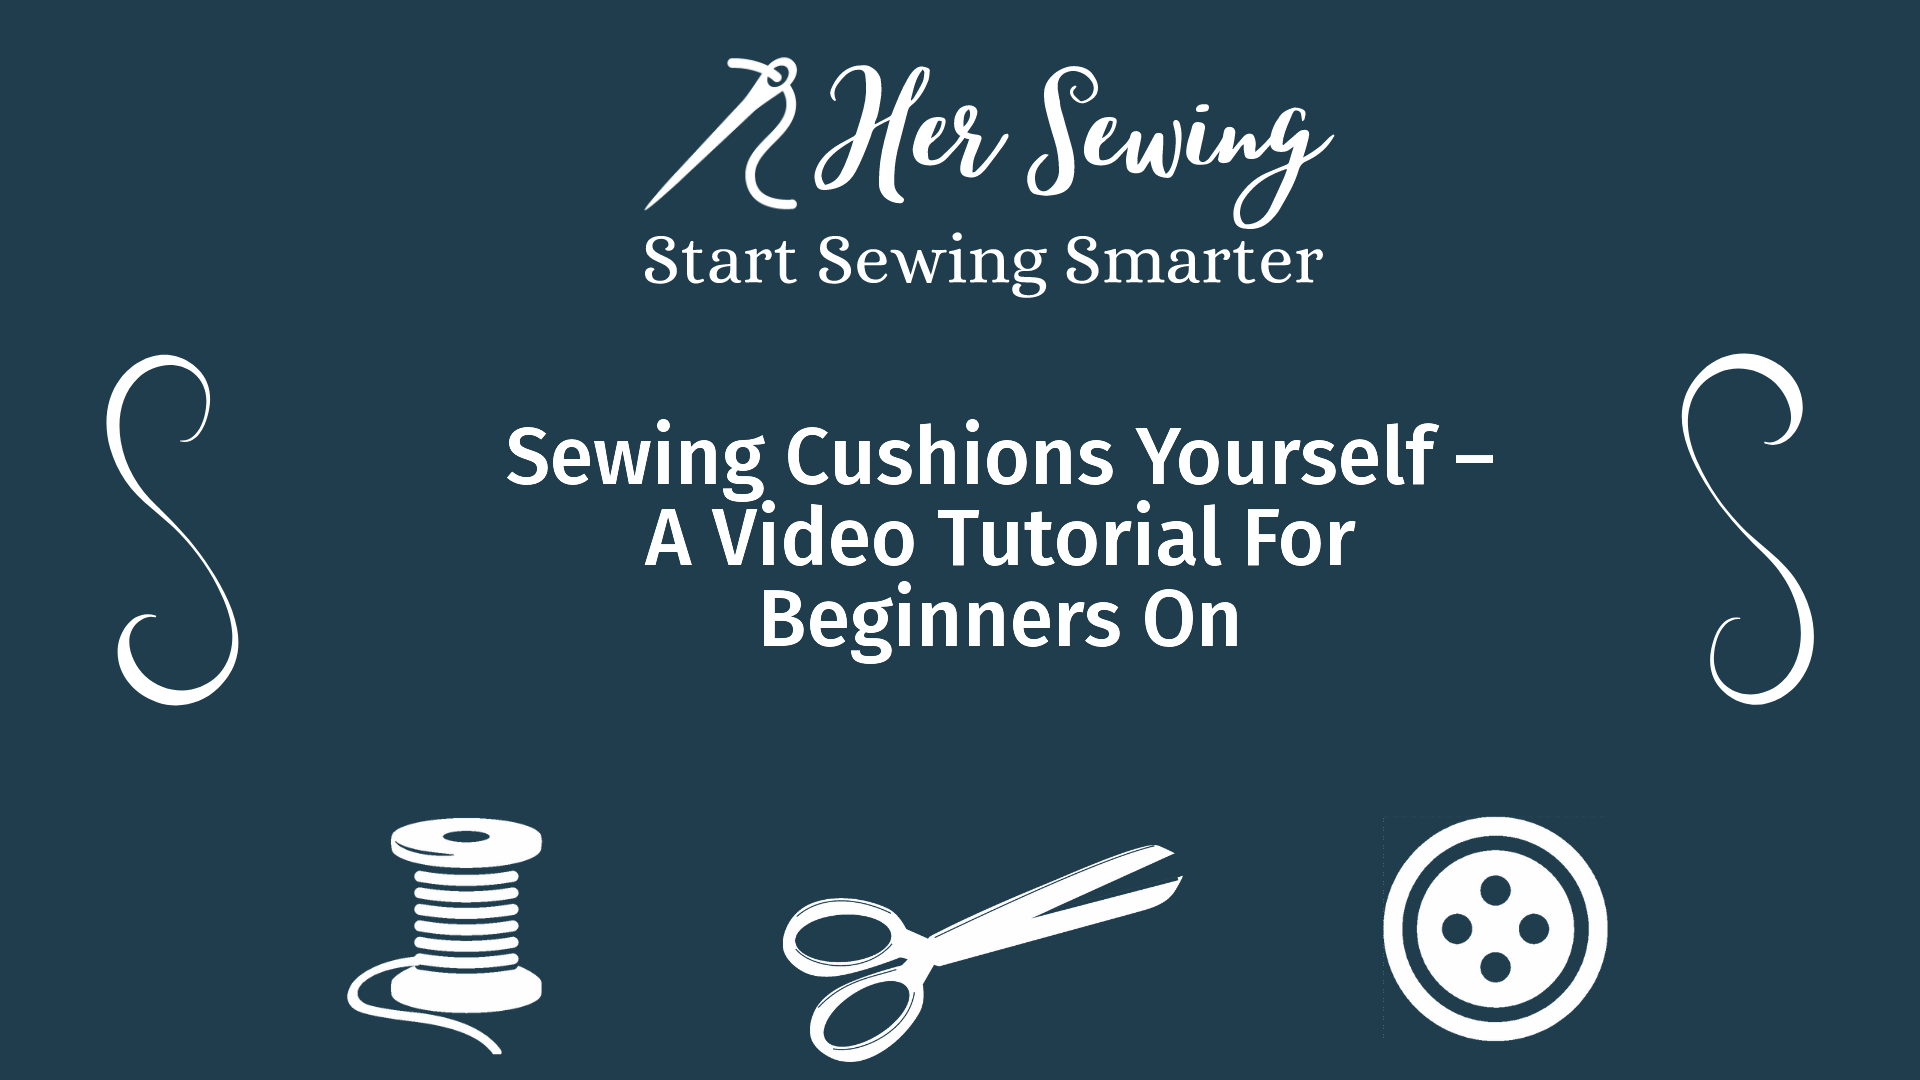 Sewing Cushions Yourself – A Video Tutorial For Beginners On